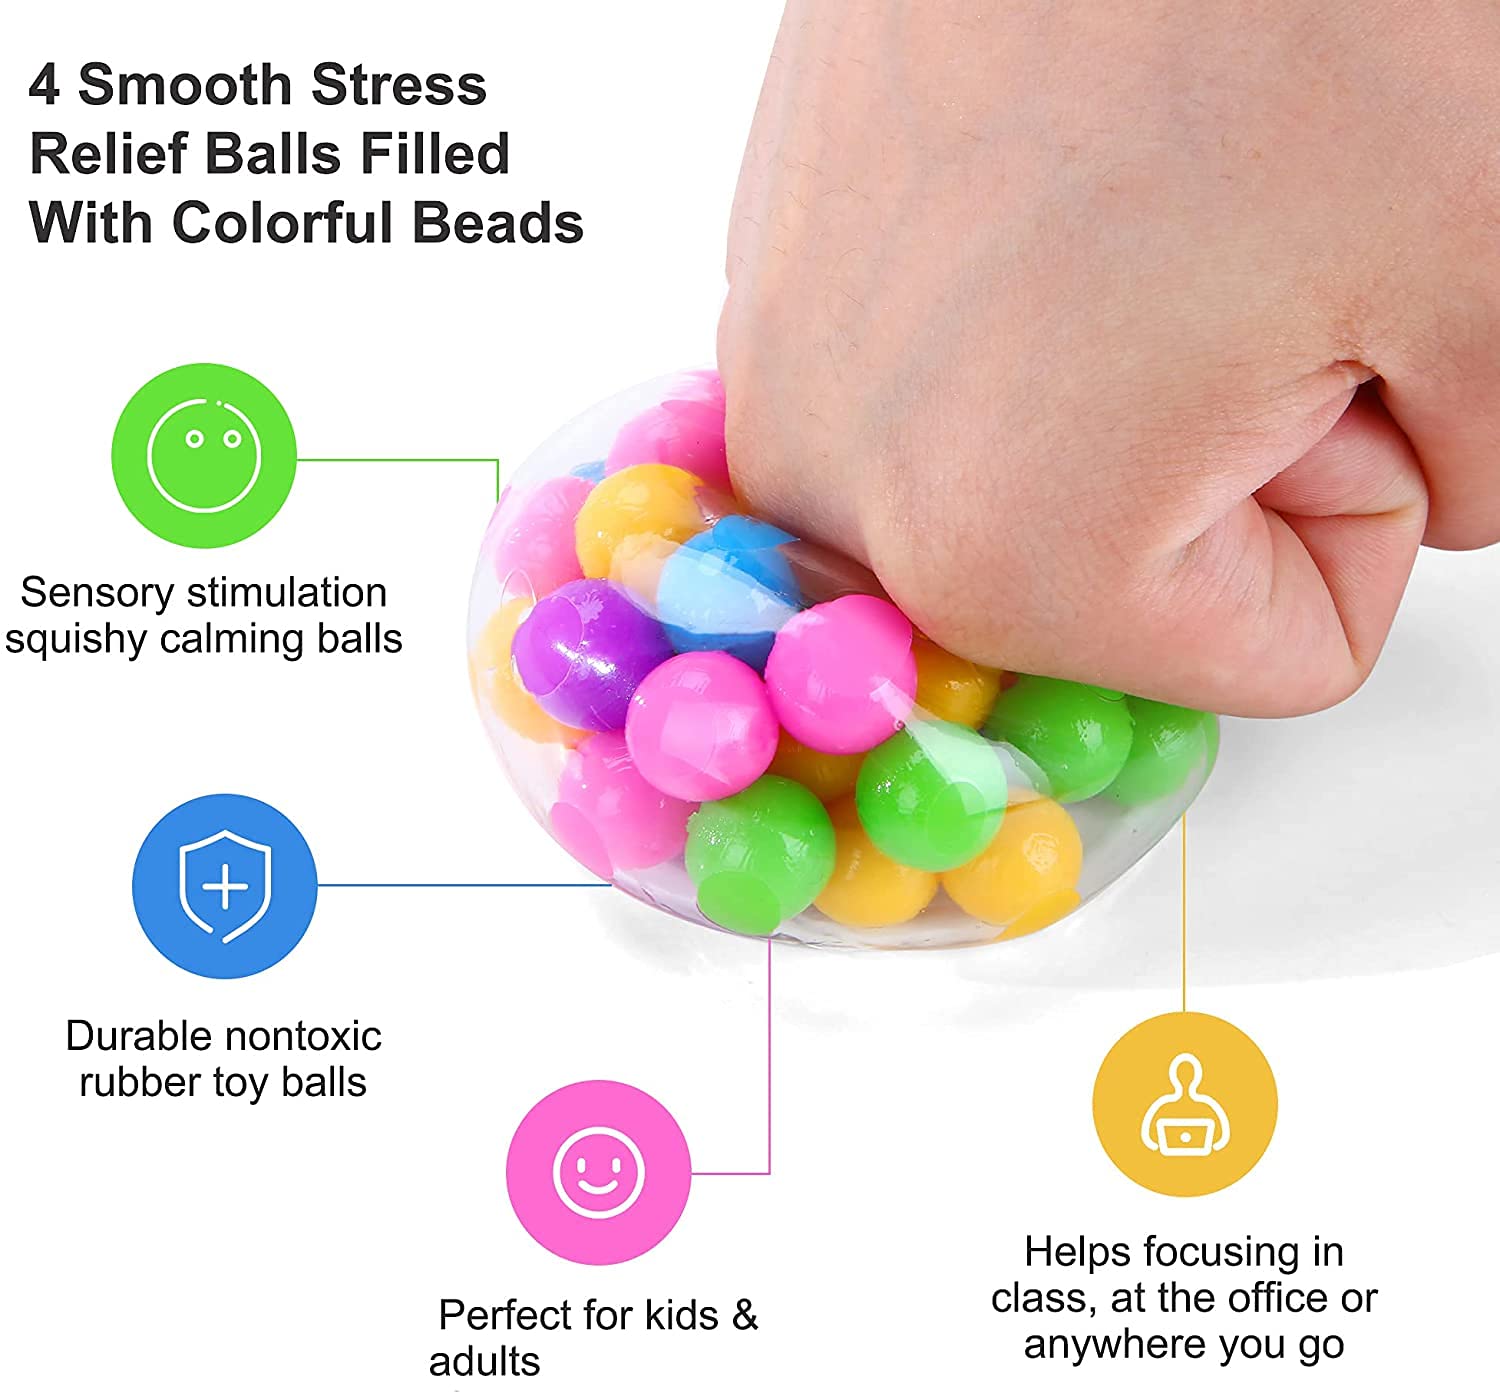 CJZZ Rainbow Stress Balls Fidget Toy, Rainbow Relief Squeezing Stress Ball for Kids Adults, Tear-Resistant, Non-Toxic,Suit ADHD, OCD, Funny Stress Ball